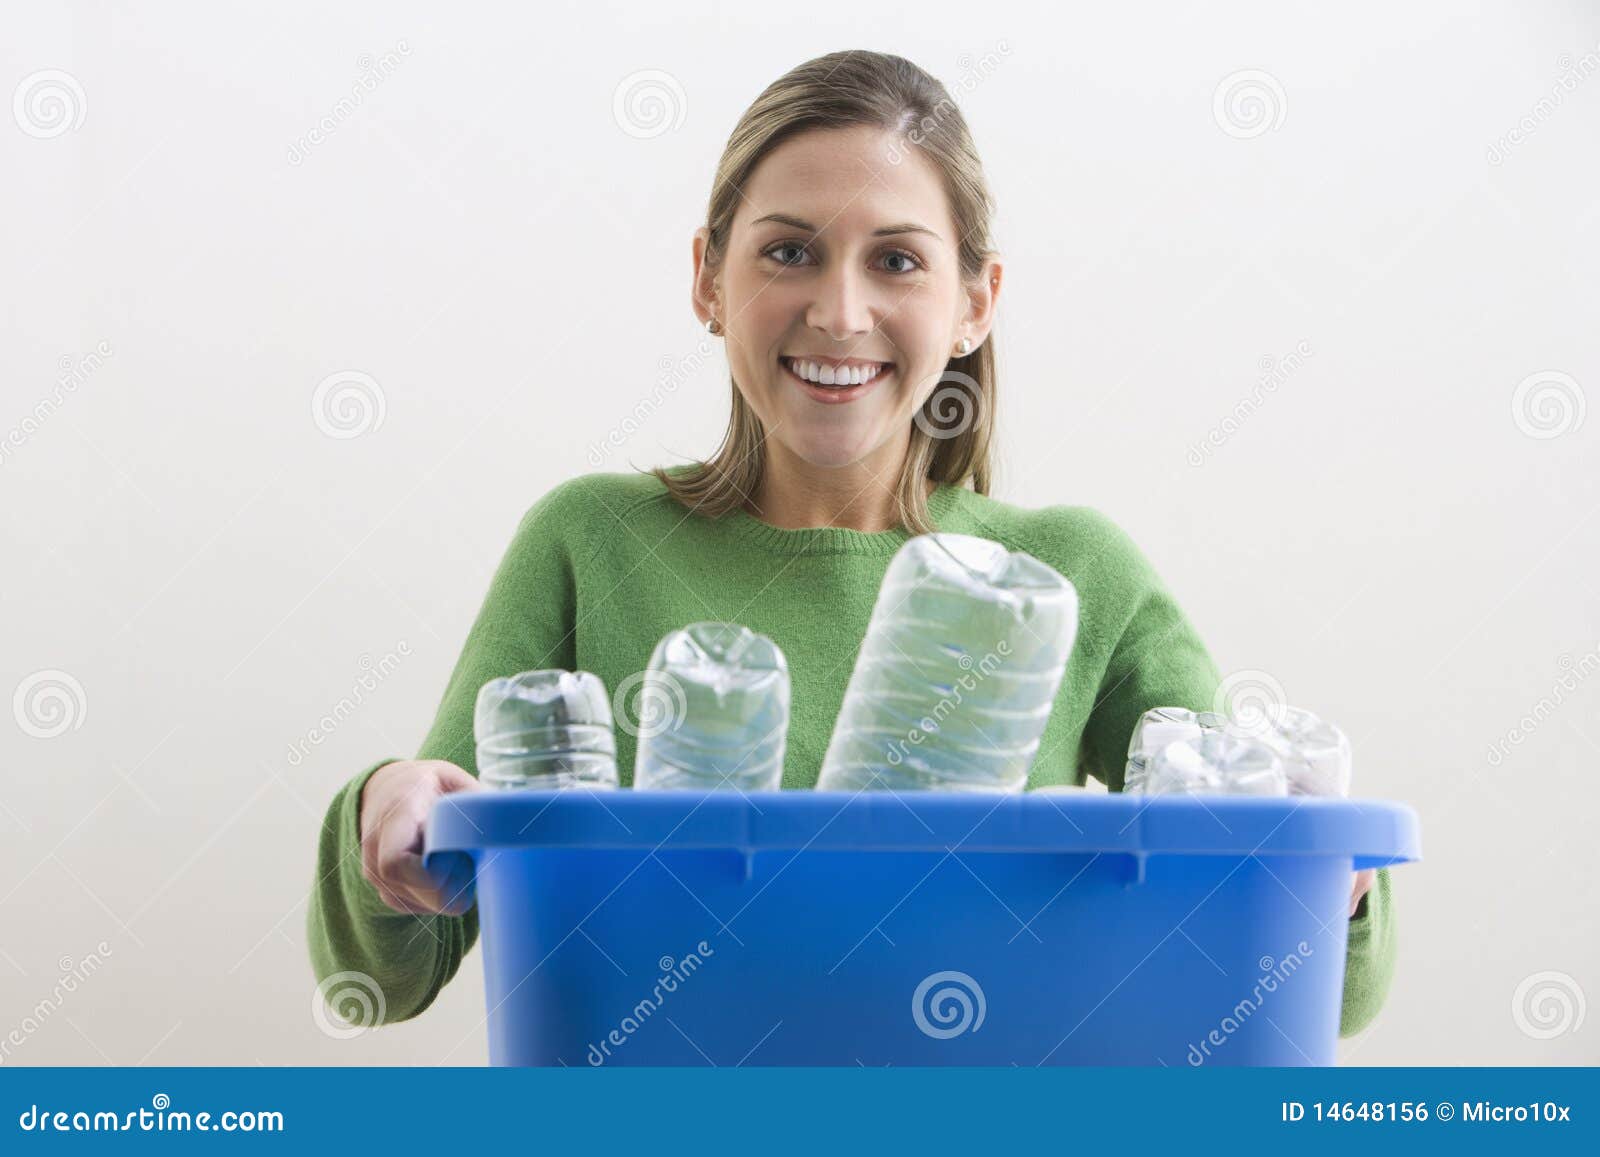 attractive young woman holding a blue recycle bin